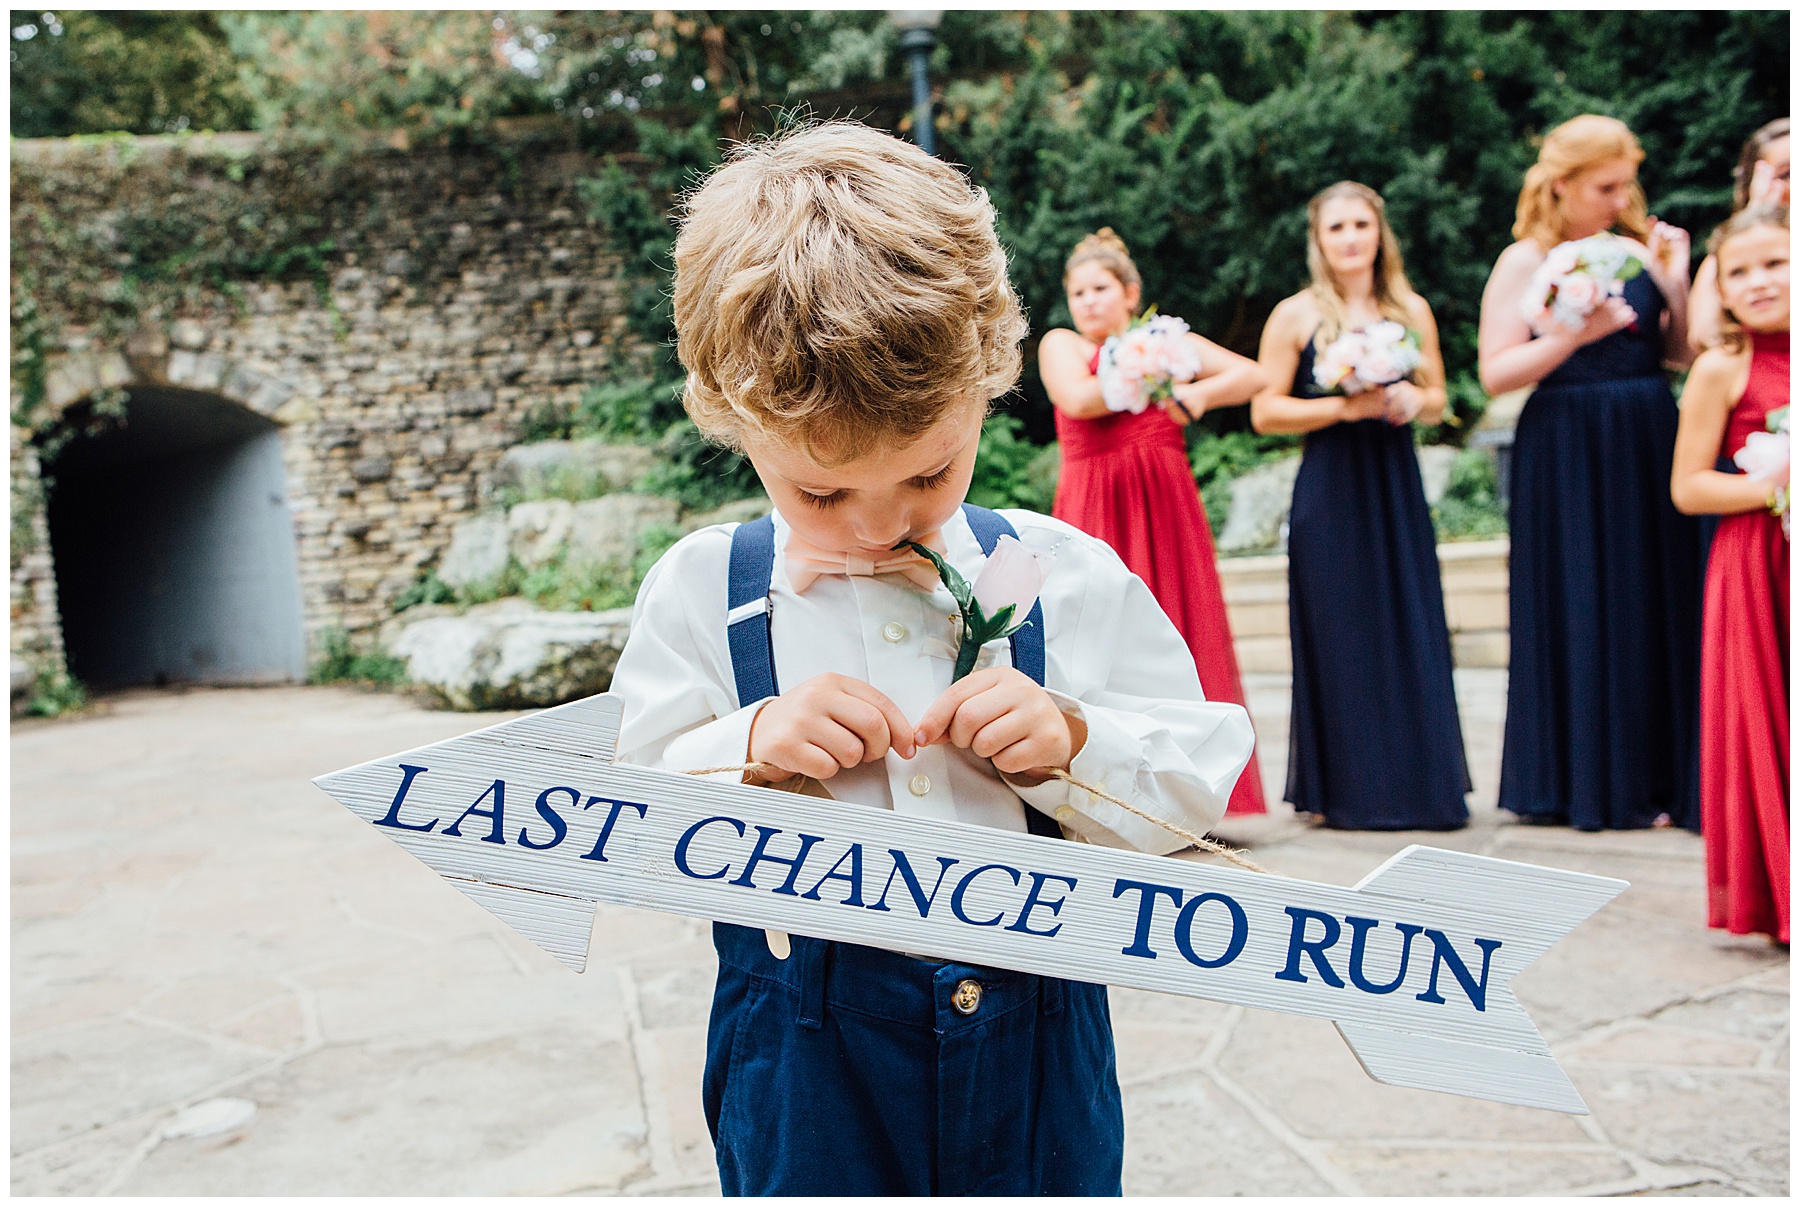 Boy holding sign last chance to run